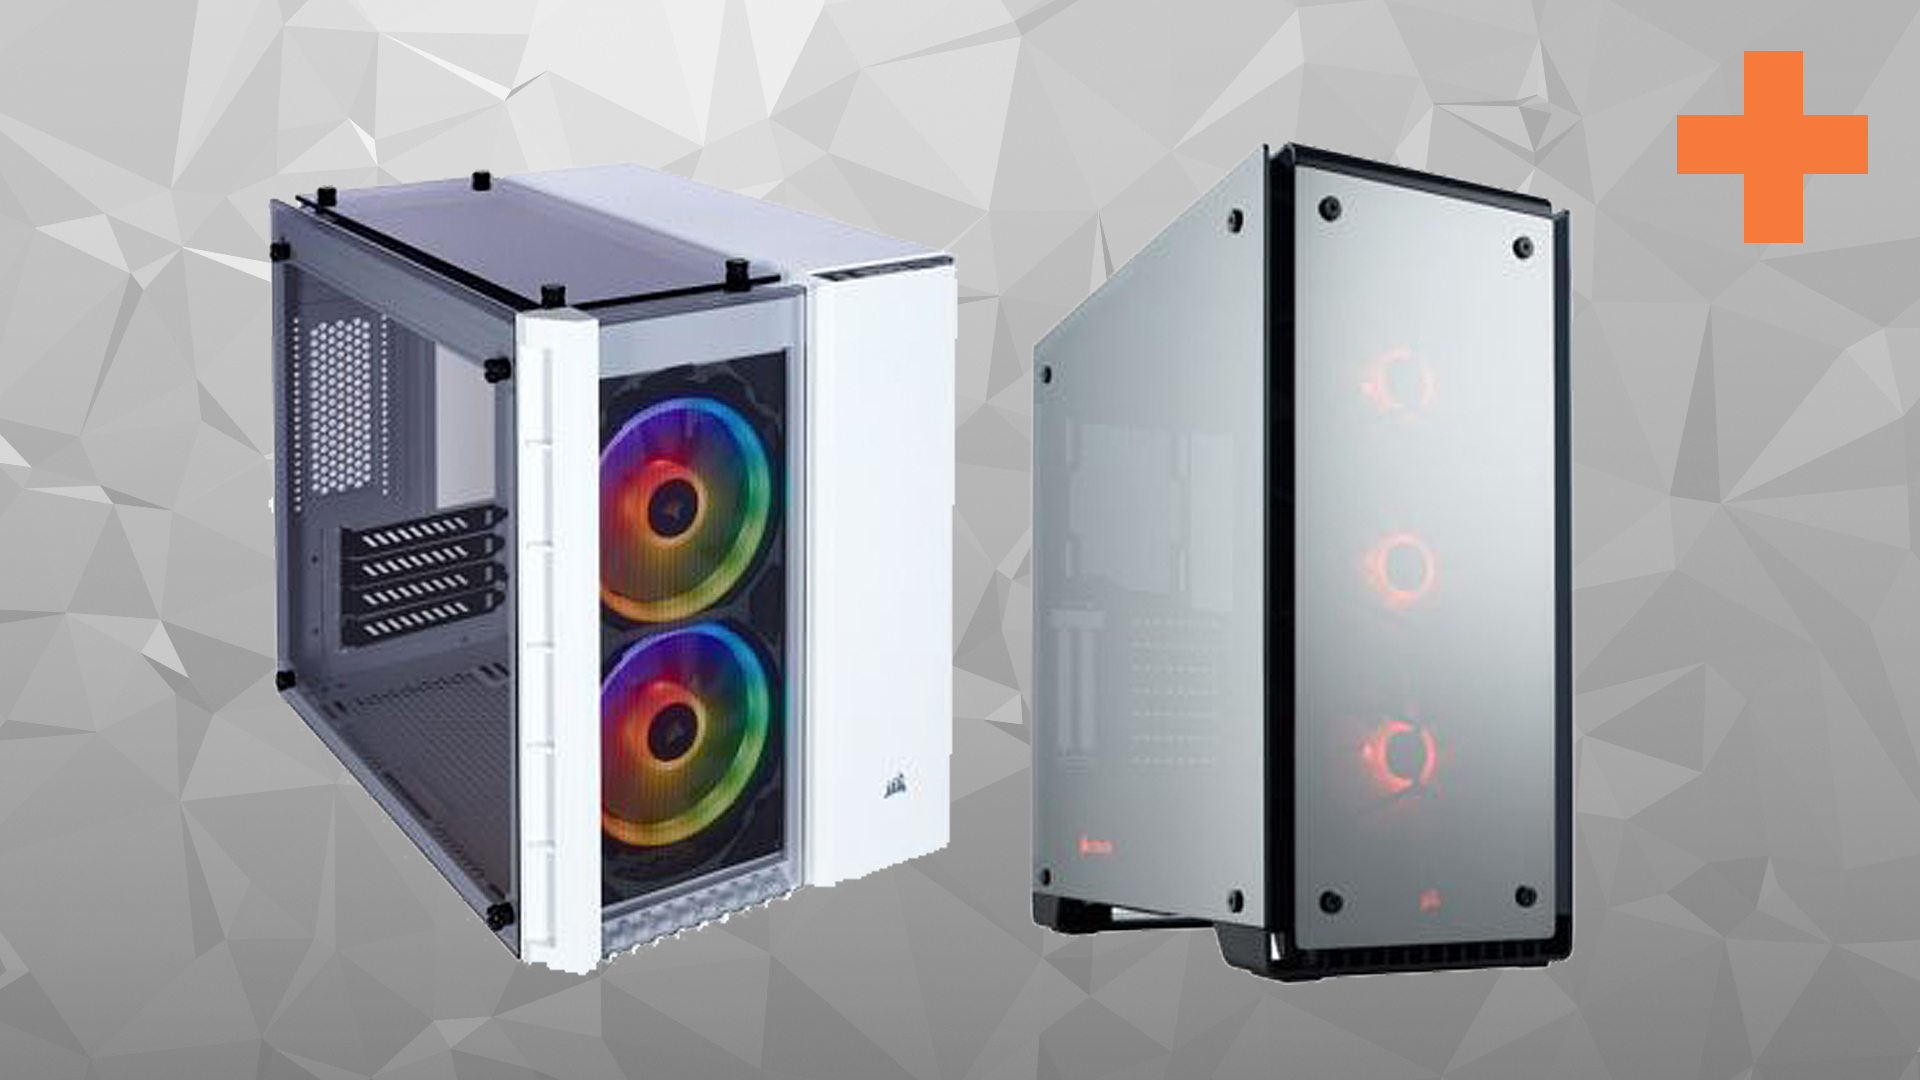 The Best Pc Cases For Gaming In 2020 Gamesradar